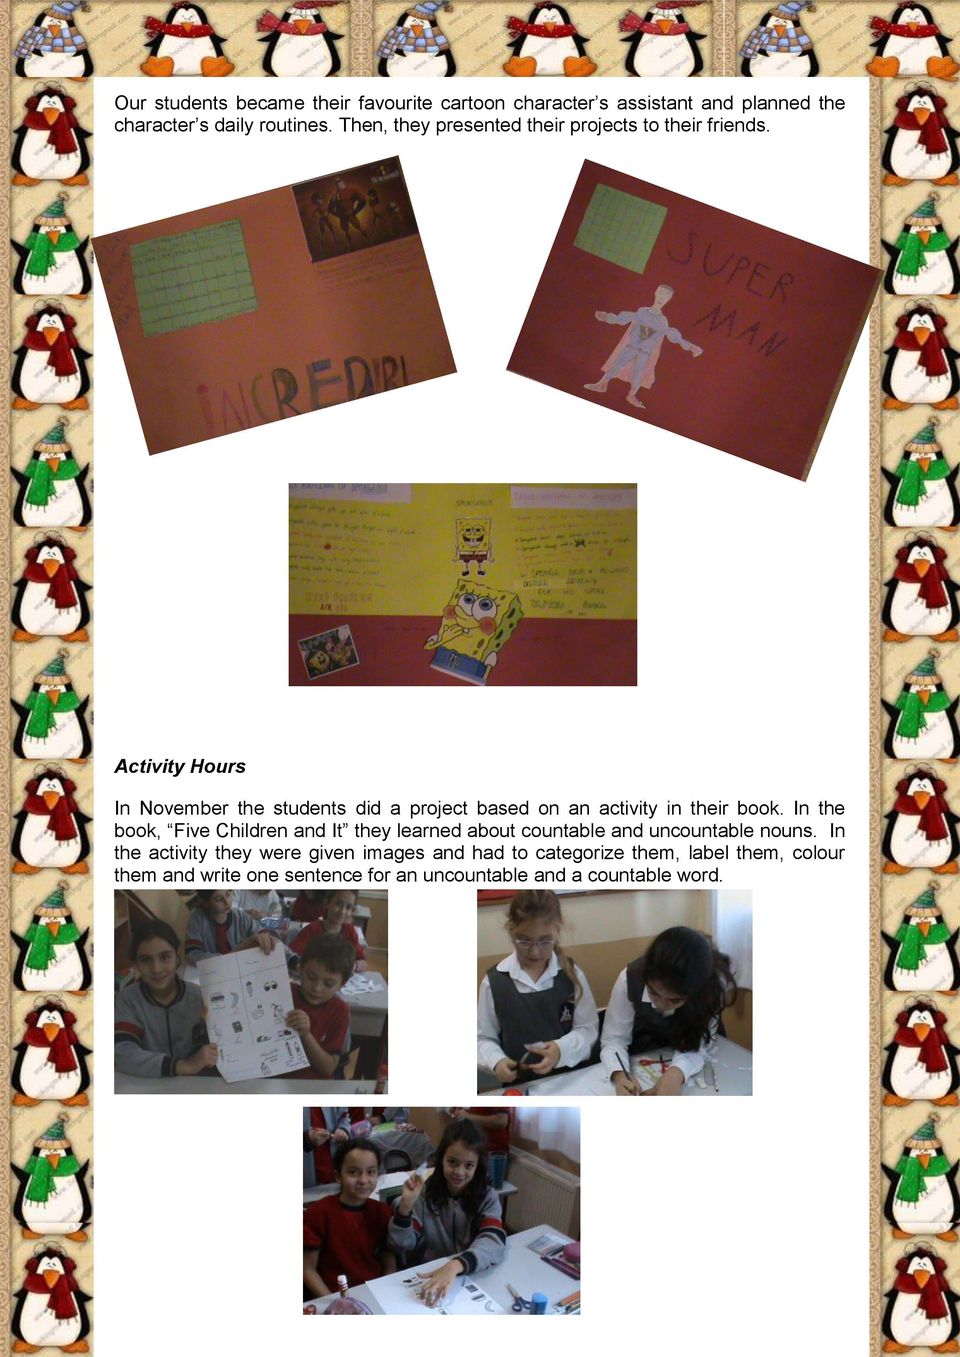 Activity Hours In November the students did a project based on an activity in their book.